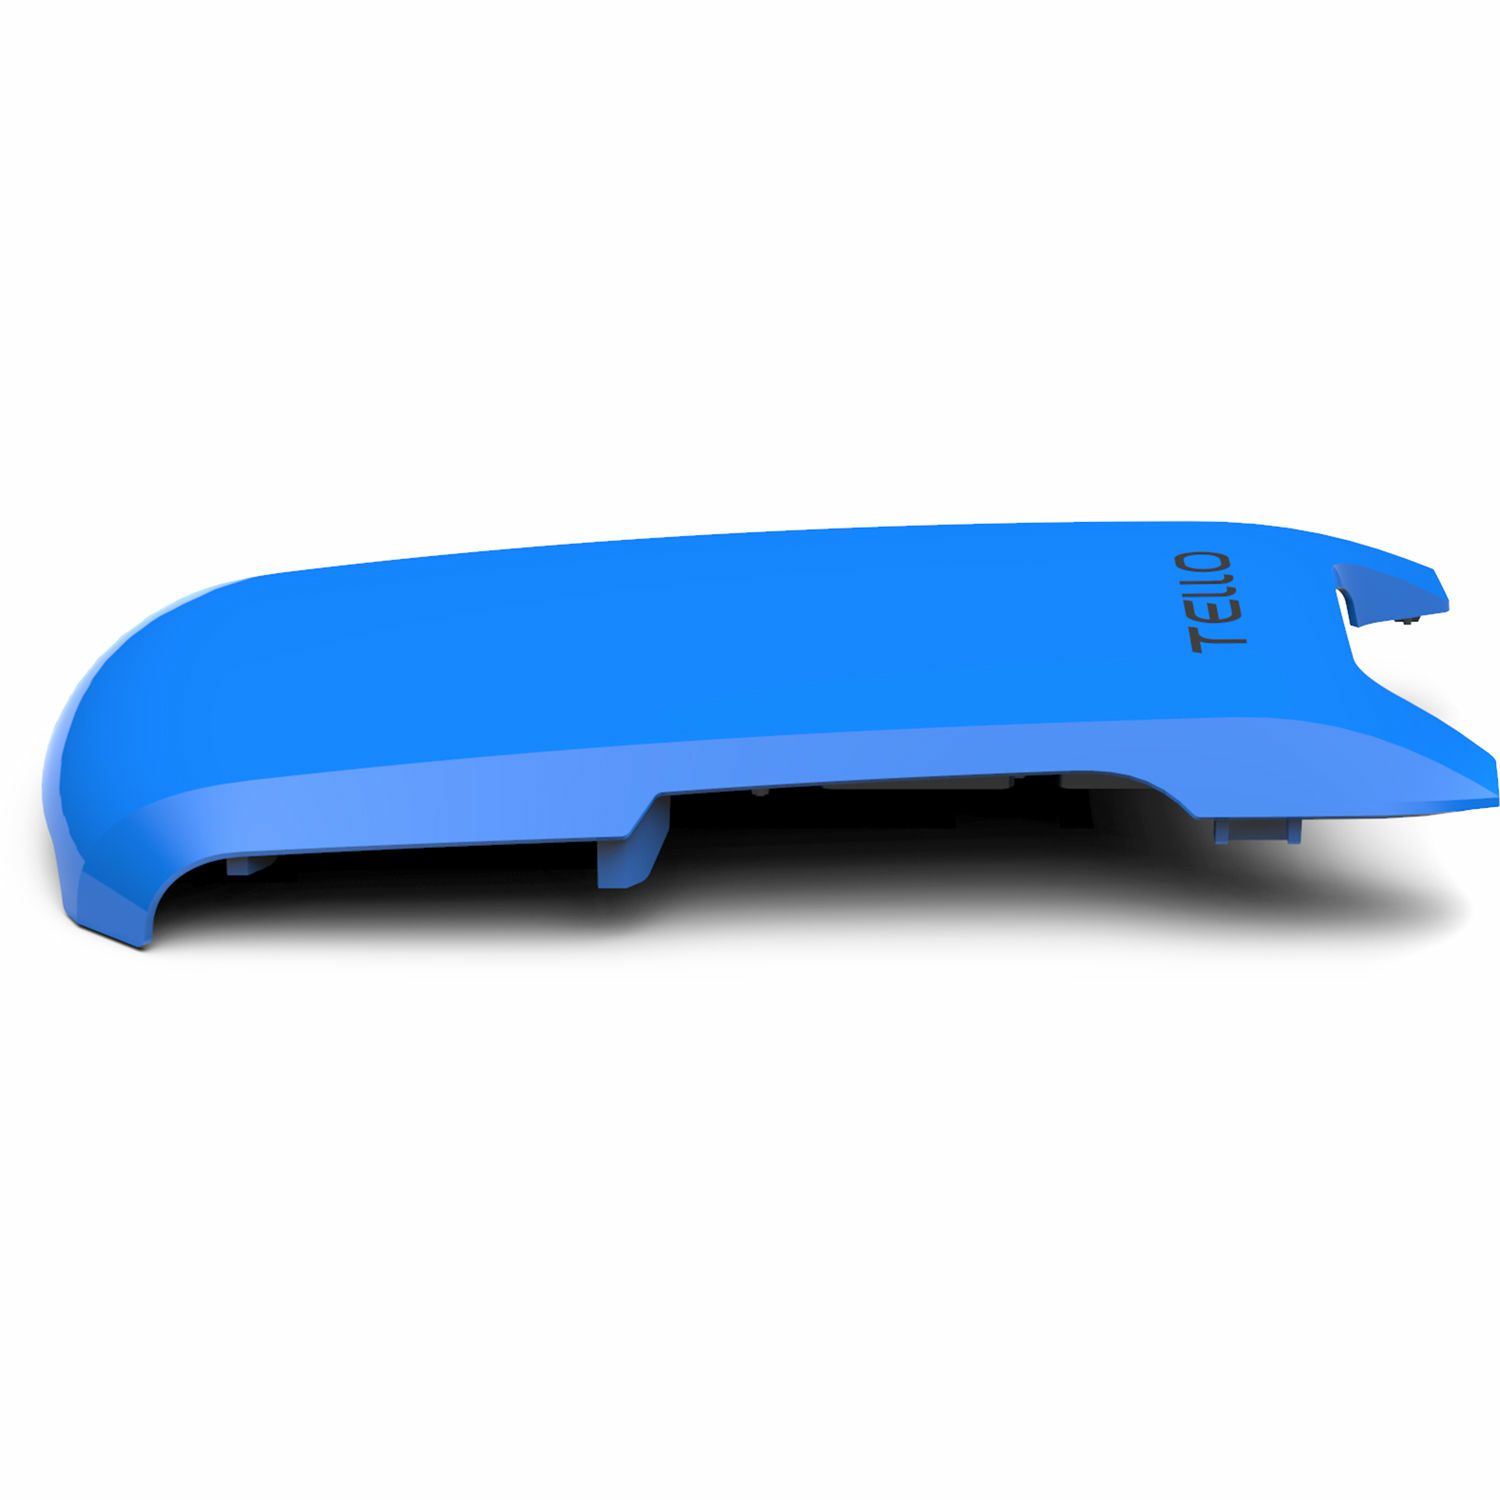 Ryze Tech Tello Spare Part 04 Snap On Top Cover (Blue)